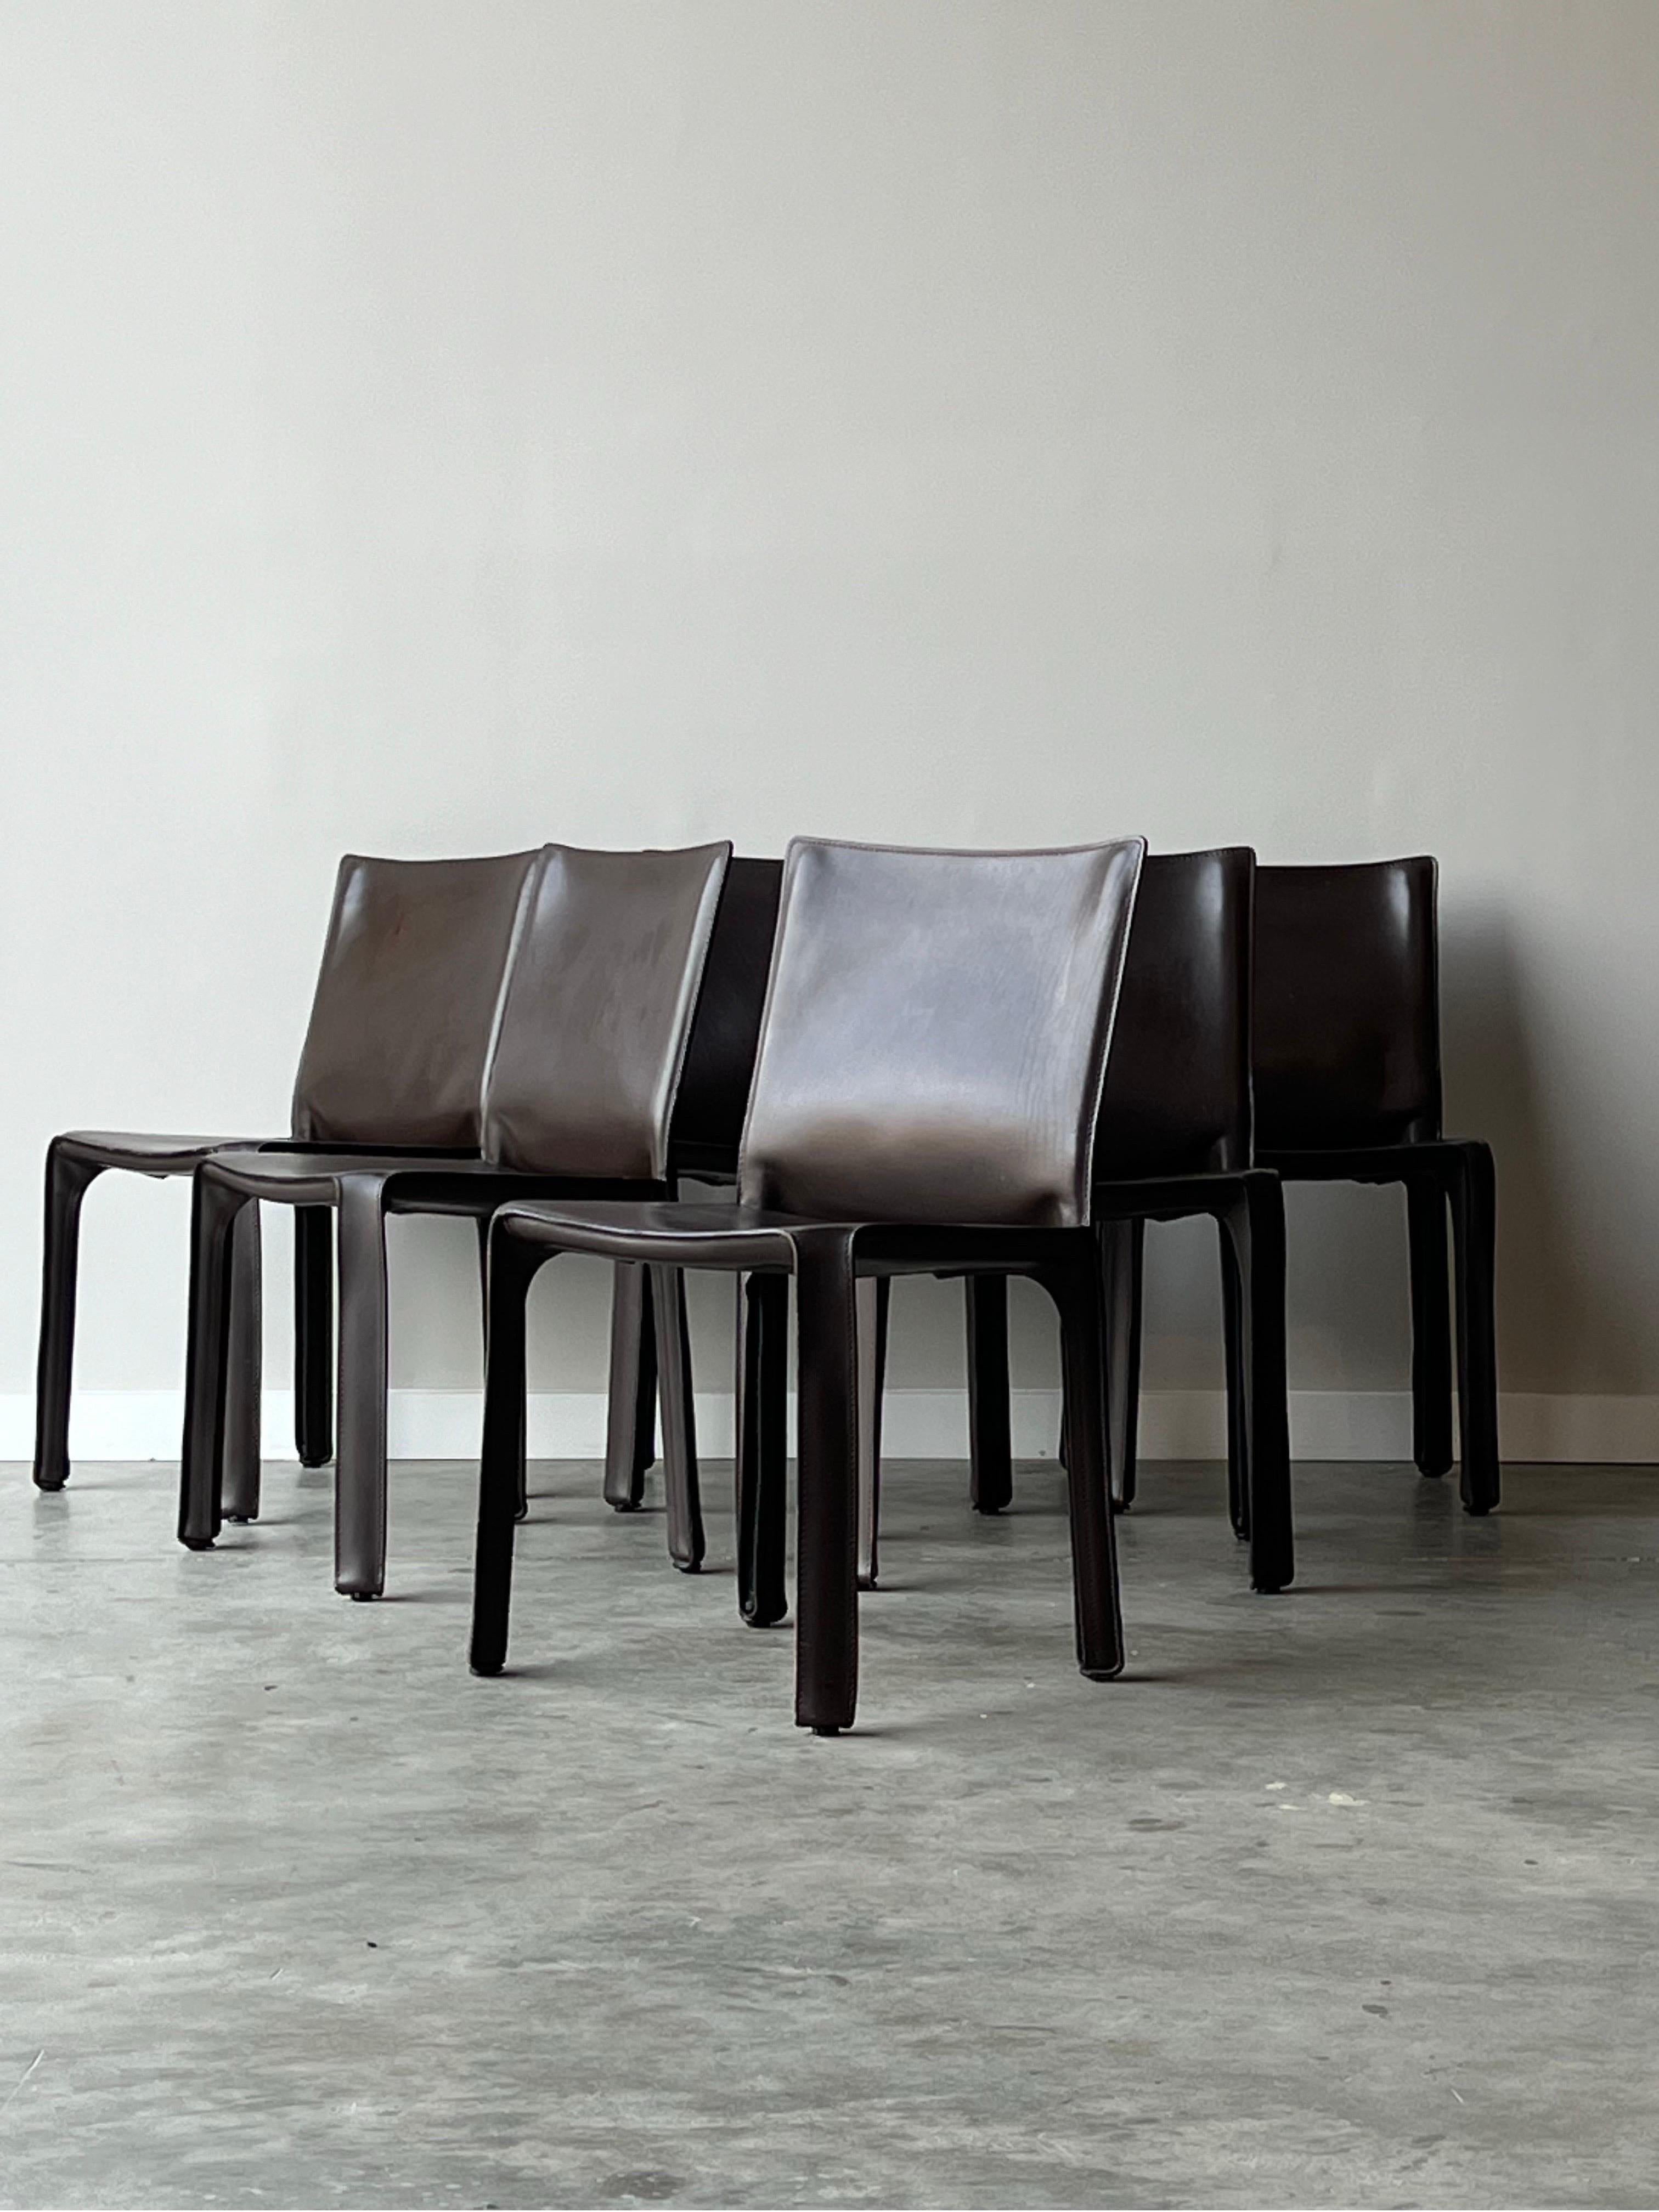 Set of six dining chairs designed by Mario Bellini for Cassina, Italy - circa 1980s. These chairs, otherwise known as the ‘CAB’ chairs, are completely wrapped in a rich dark brown leather. Zippers can be found on the bottom of the chair and follow